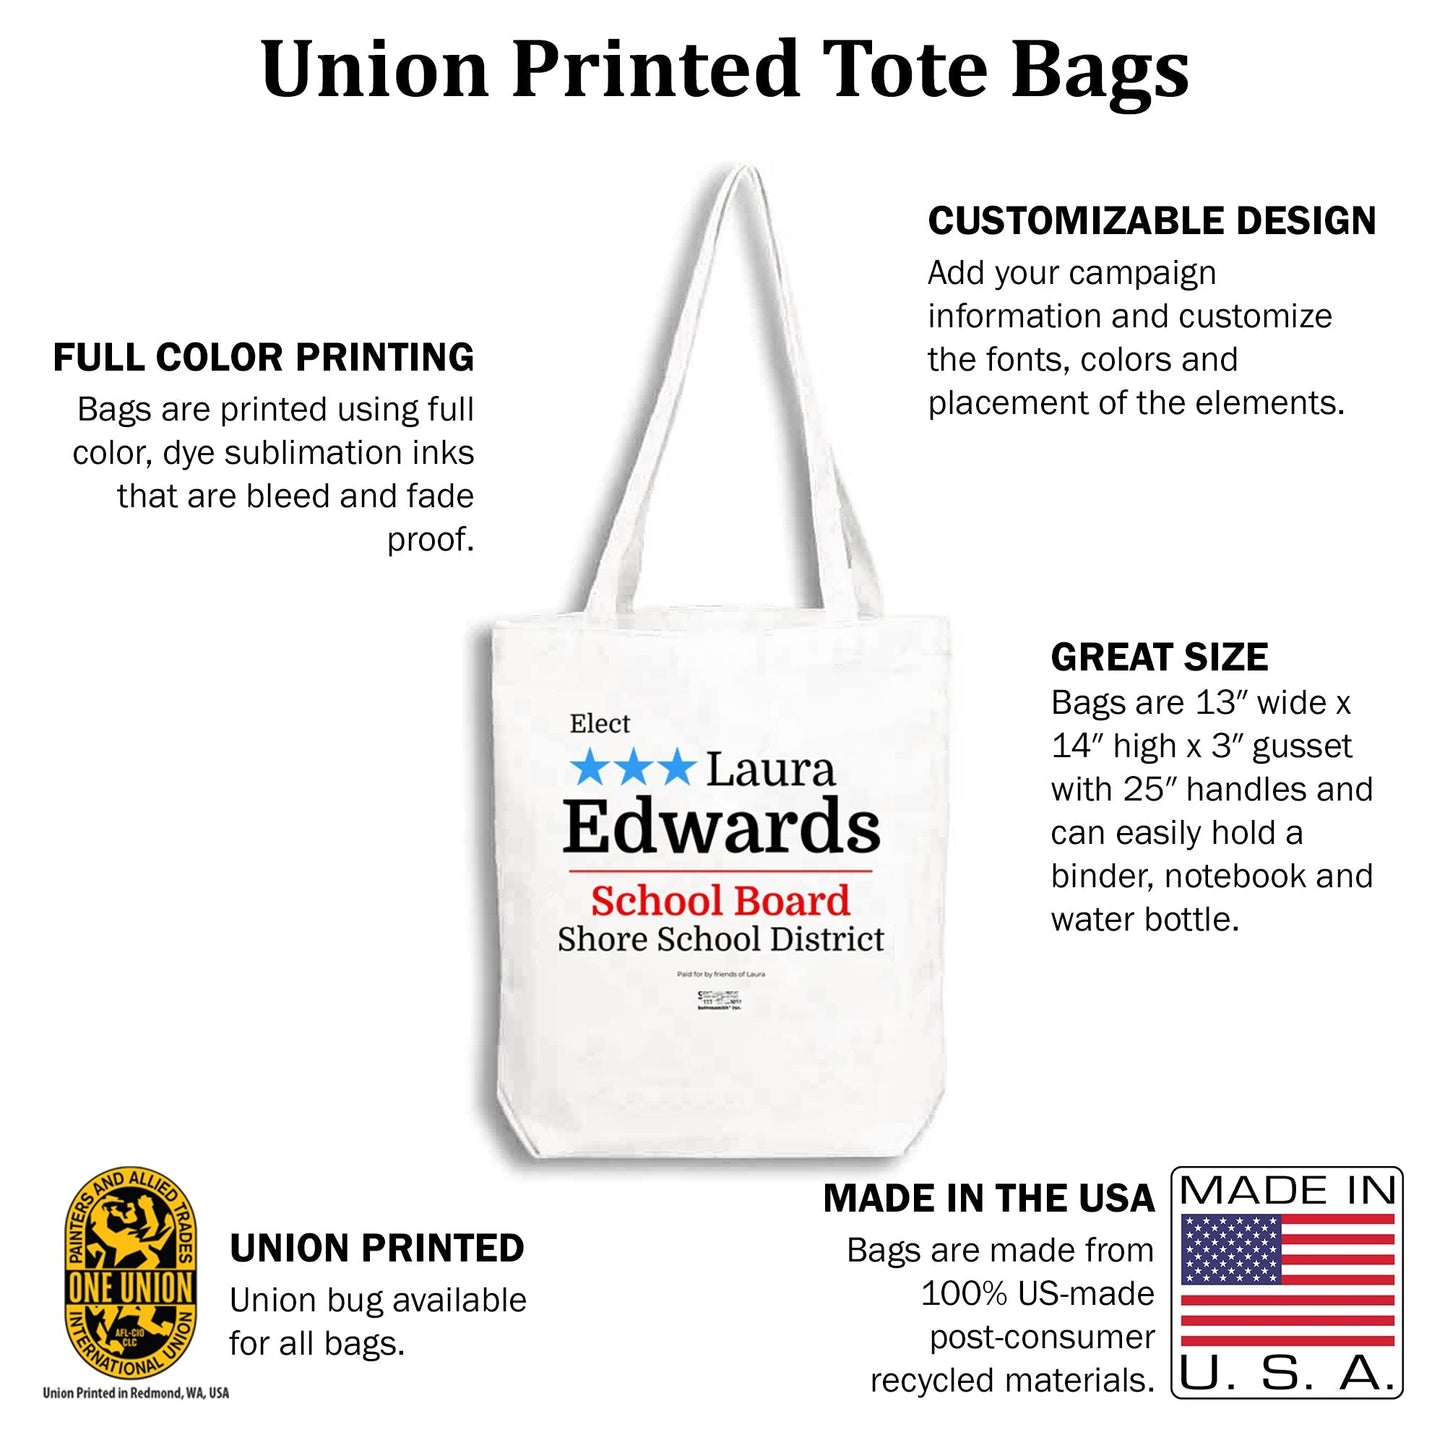 MerchBlue Union-Printed Tote Bag - Star Line design - Made in the USA from recycled fabric